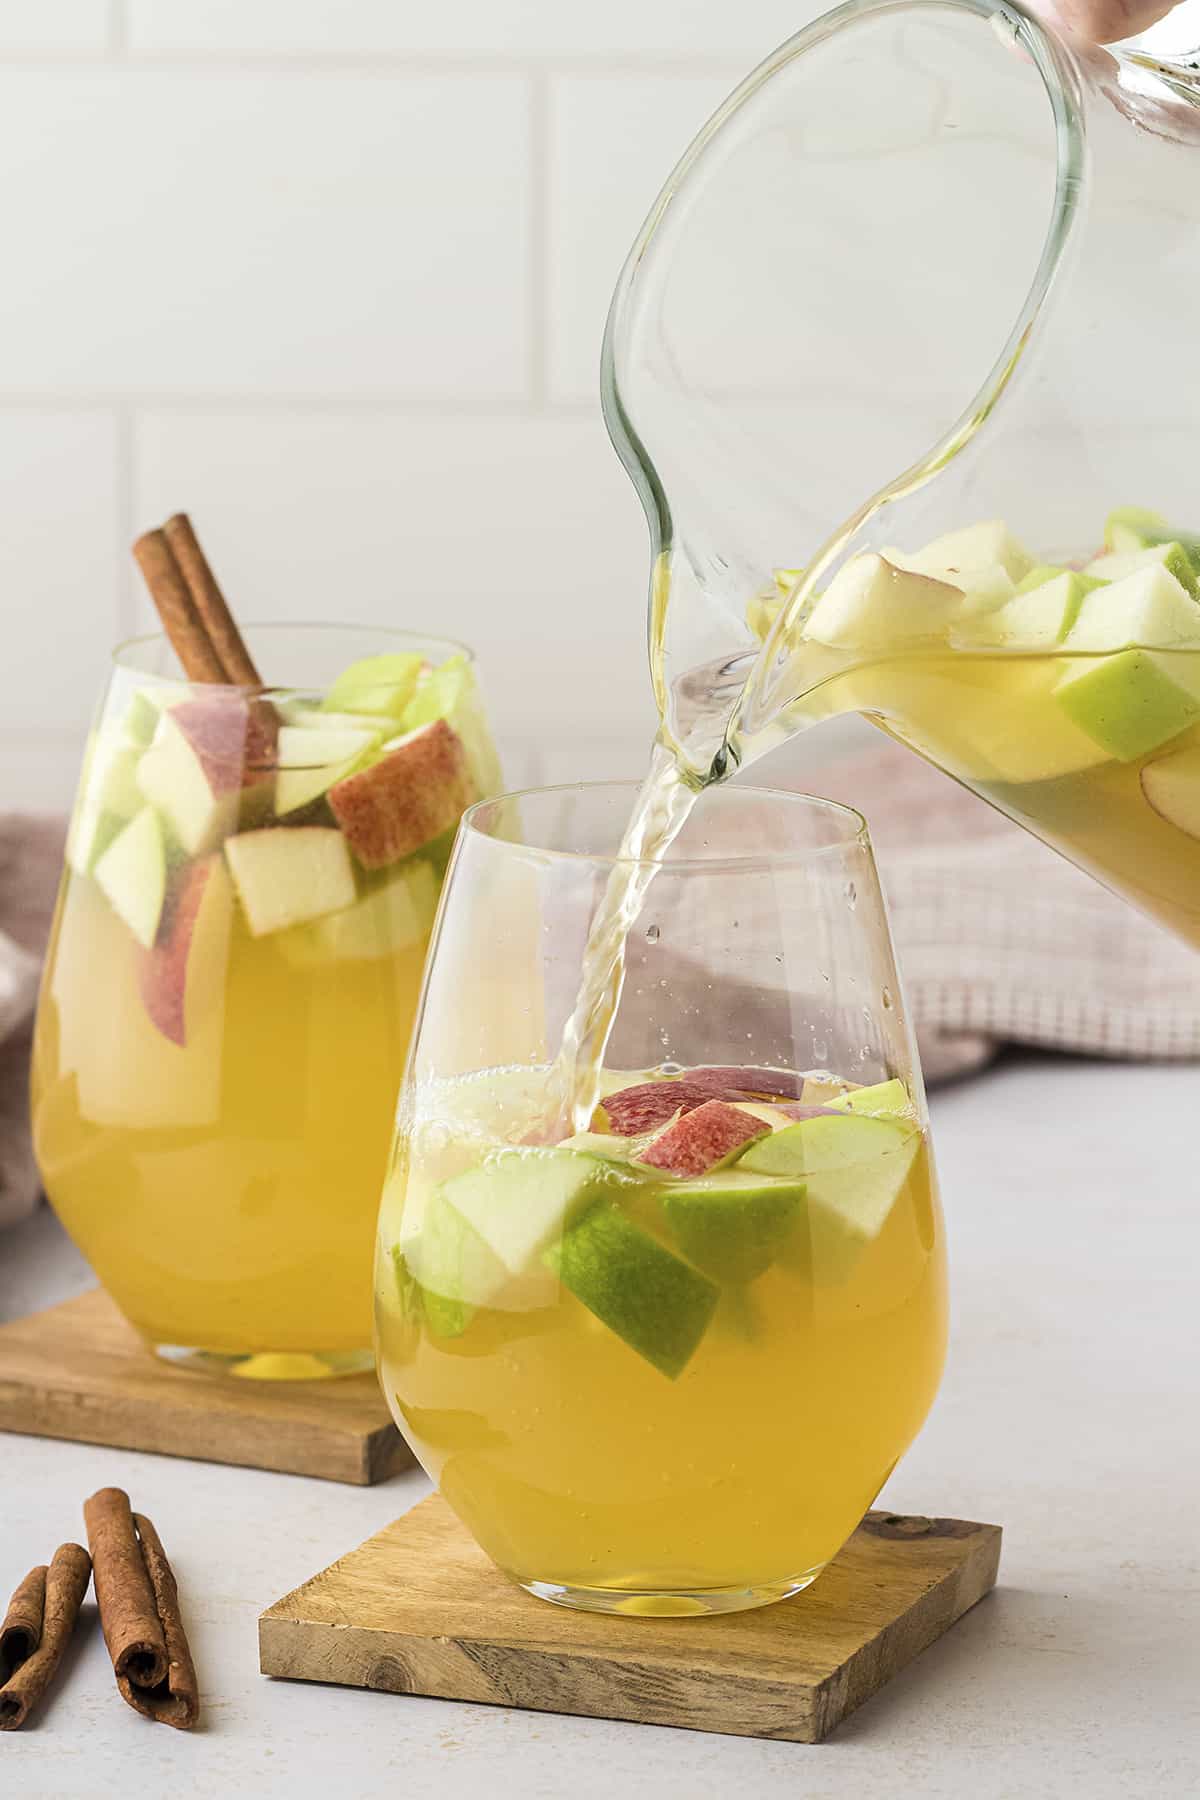 Caramel apple sangria being poured from pitcher into stemless wine glass.